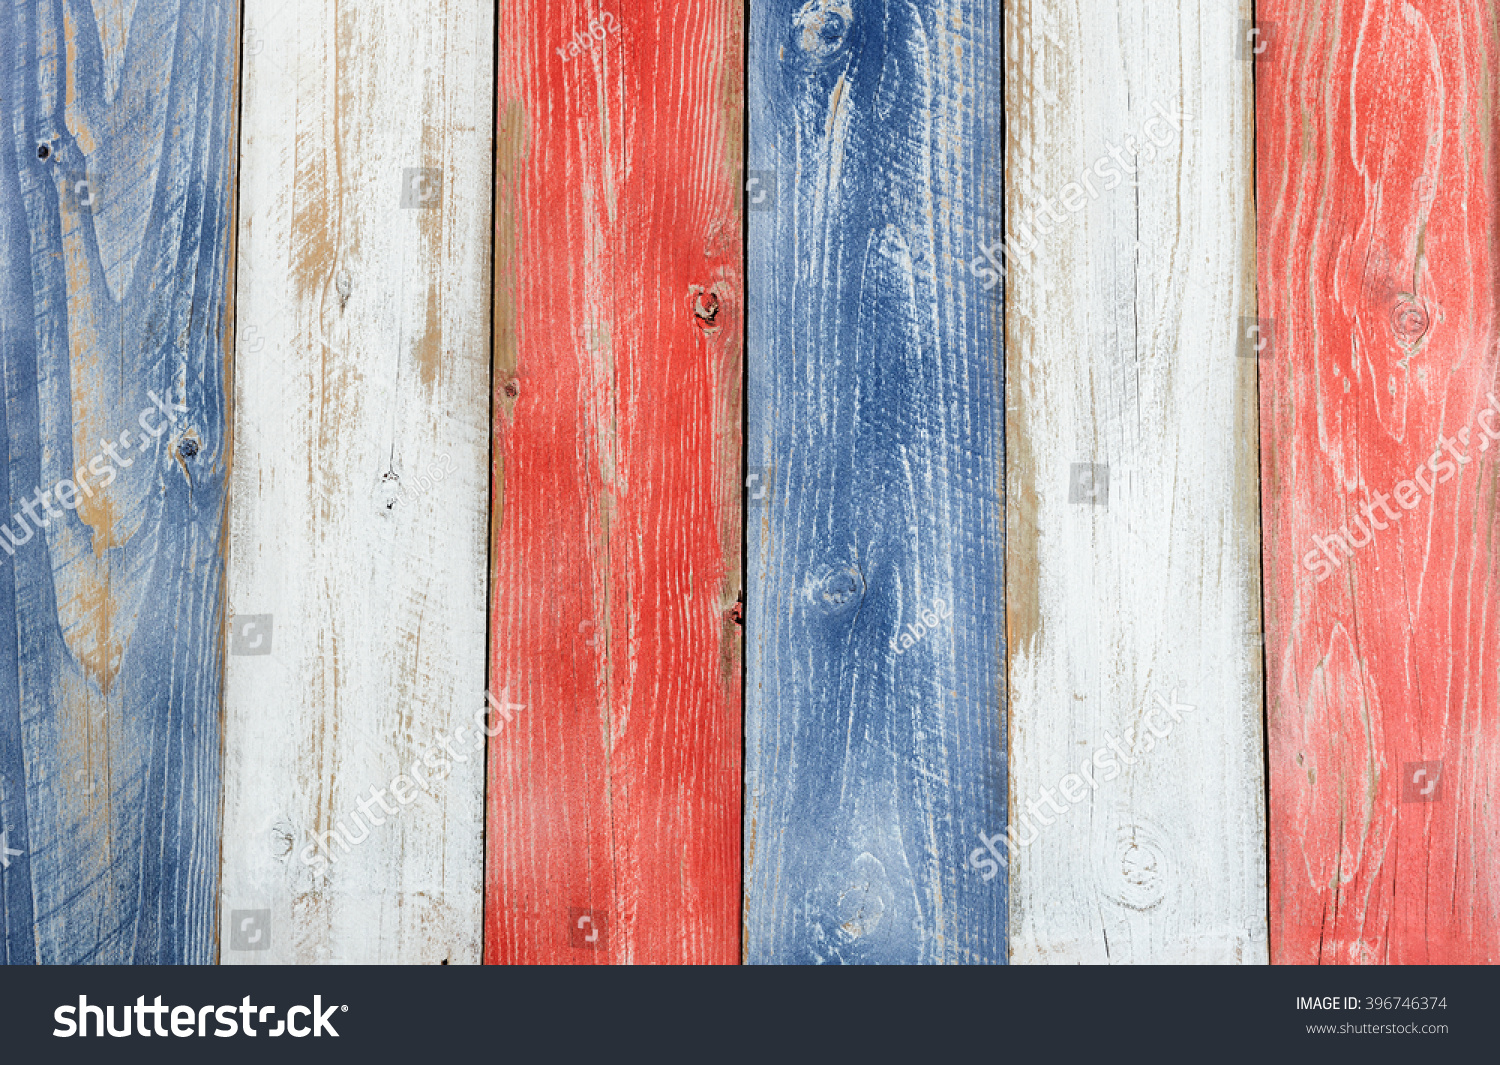 Stressed wooden boards painted red, white and blue for patriotic concept of United States of America. Layout in vertical format.  #396746374